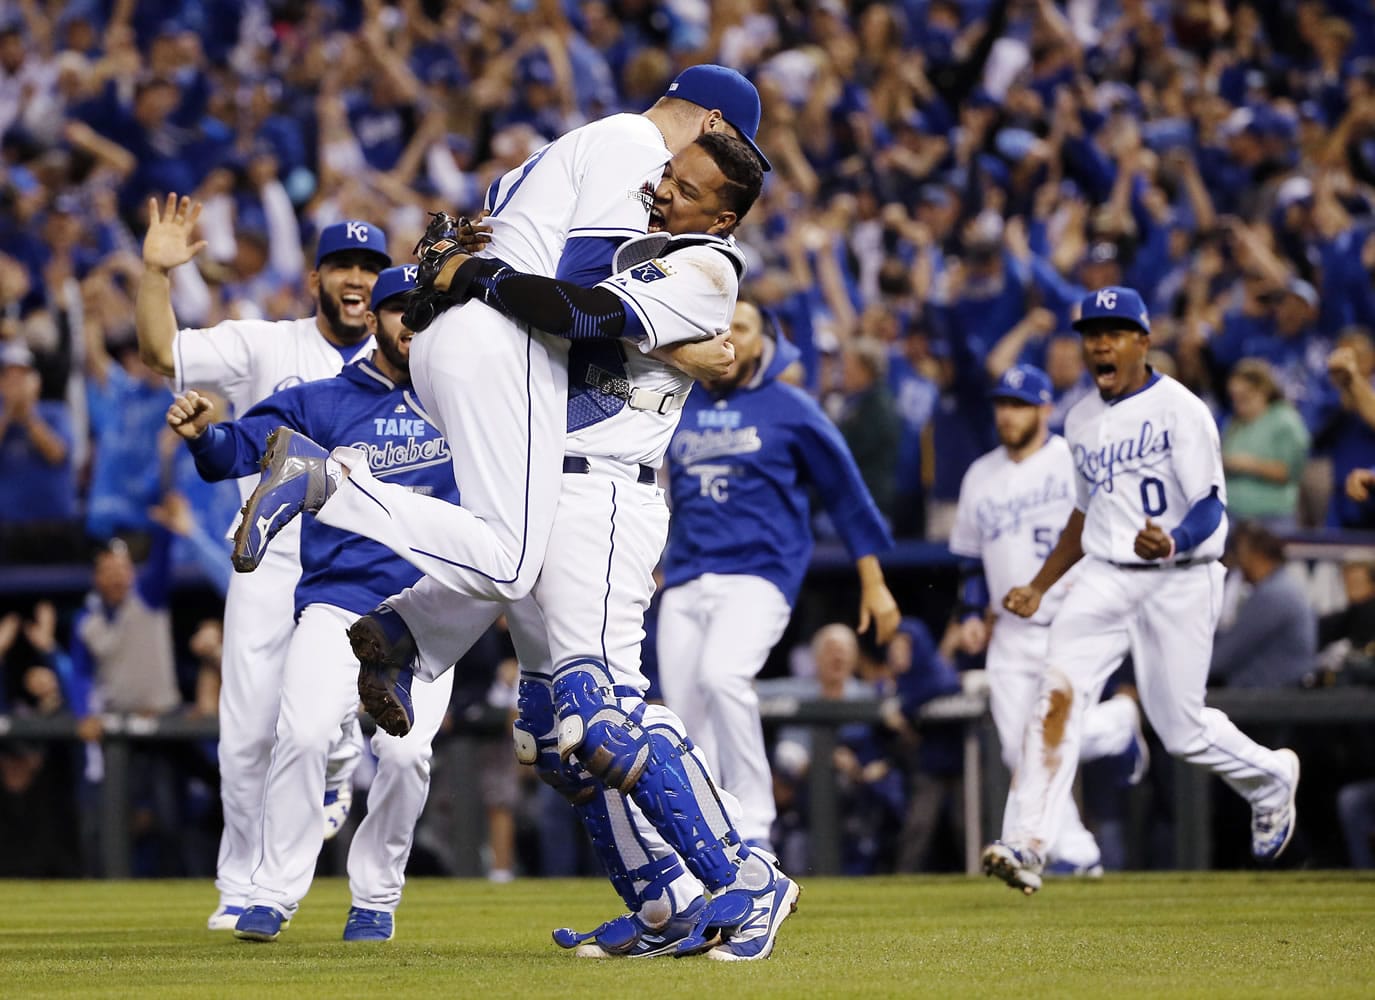 Kansas City Royals relief pitcher Wade Davis, left, and catcher Salvador Perez celebrates their 4-3 win against the Toronto Blue Jays in Game 6 of baseball's American League Championship Series on Friday, Oct. 23, 2015, in Kansas City, Mo.